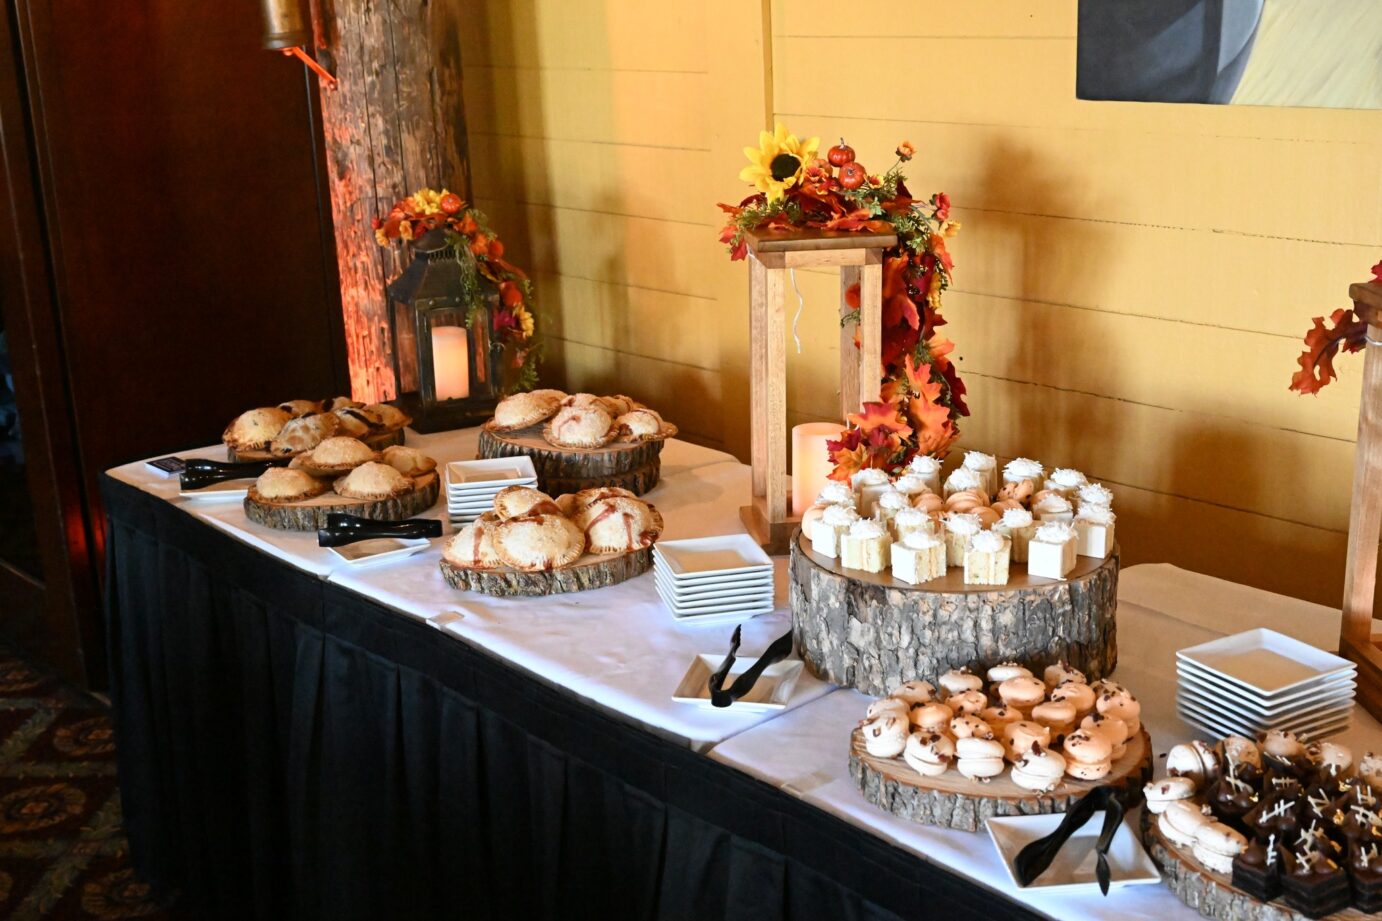 Catering spread of desserts